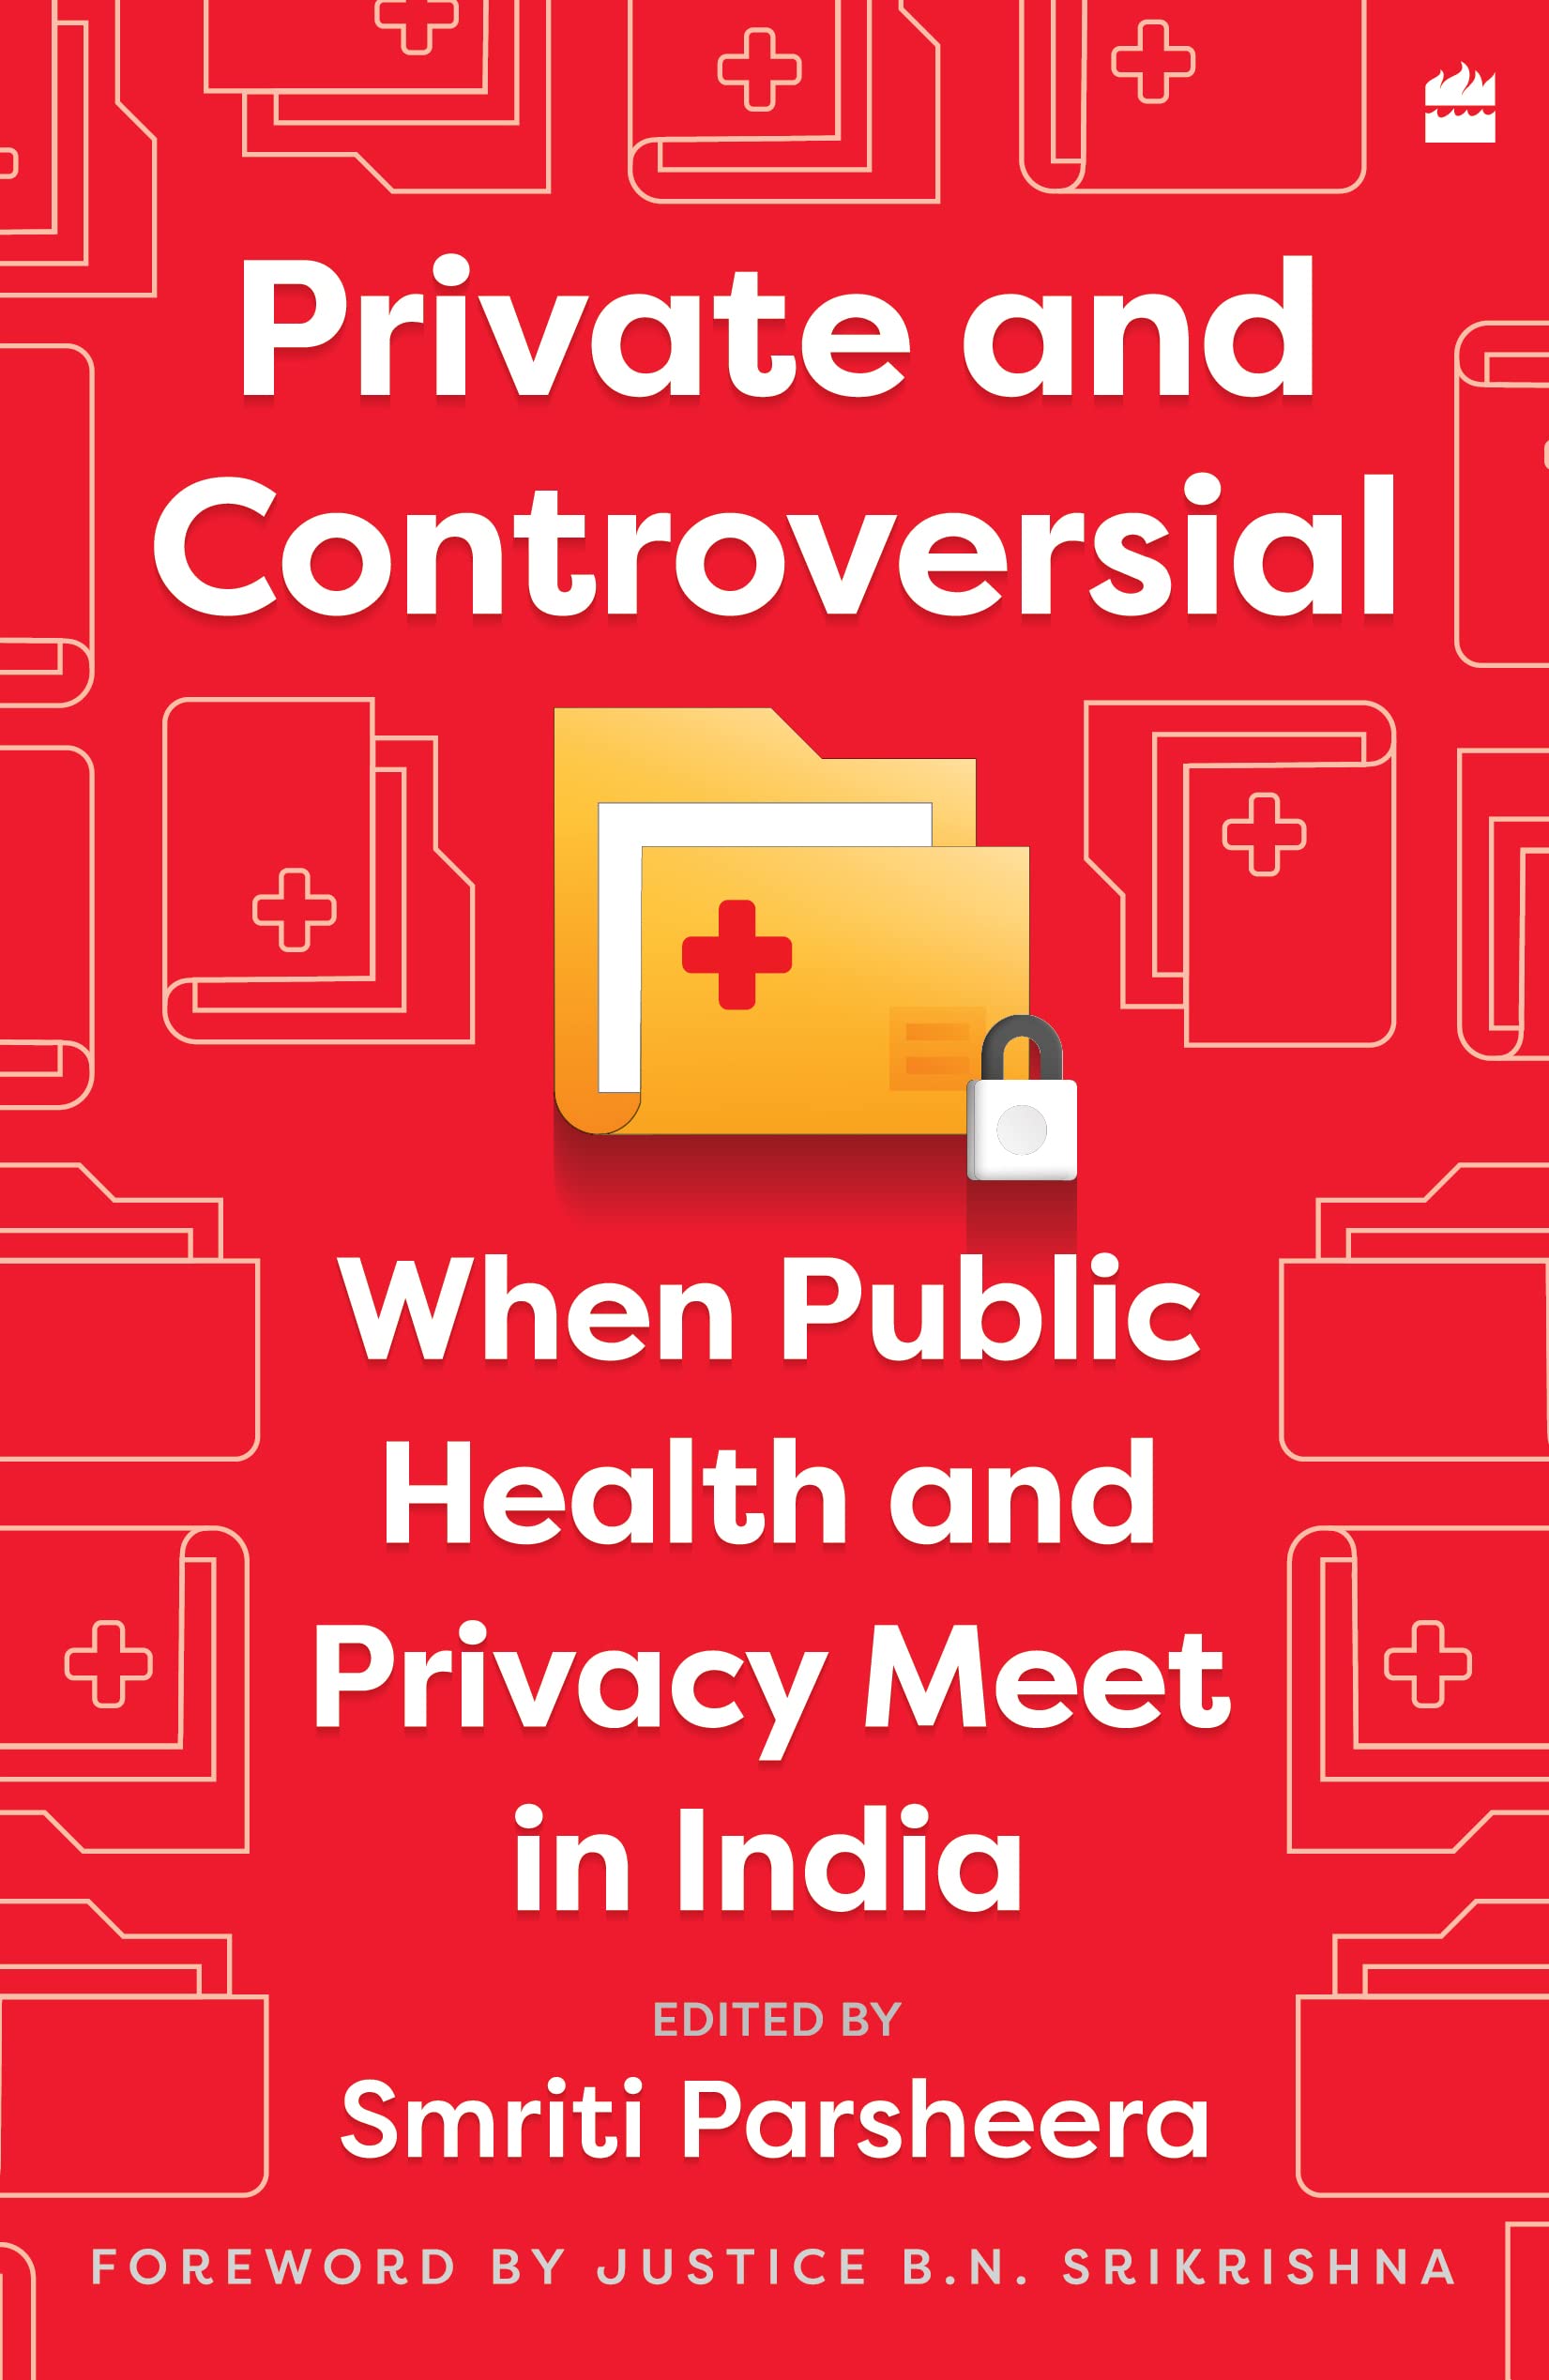 "Private and Controversial": This book explores the intersection between privacy and public health